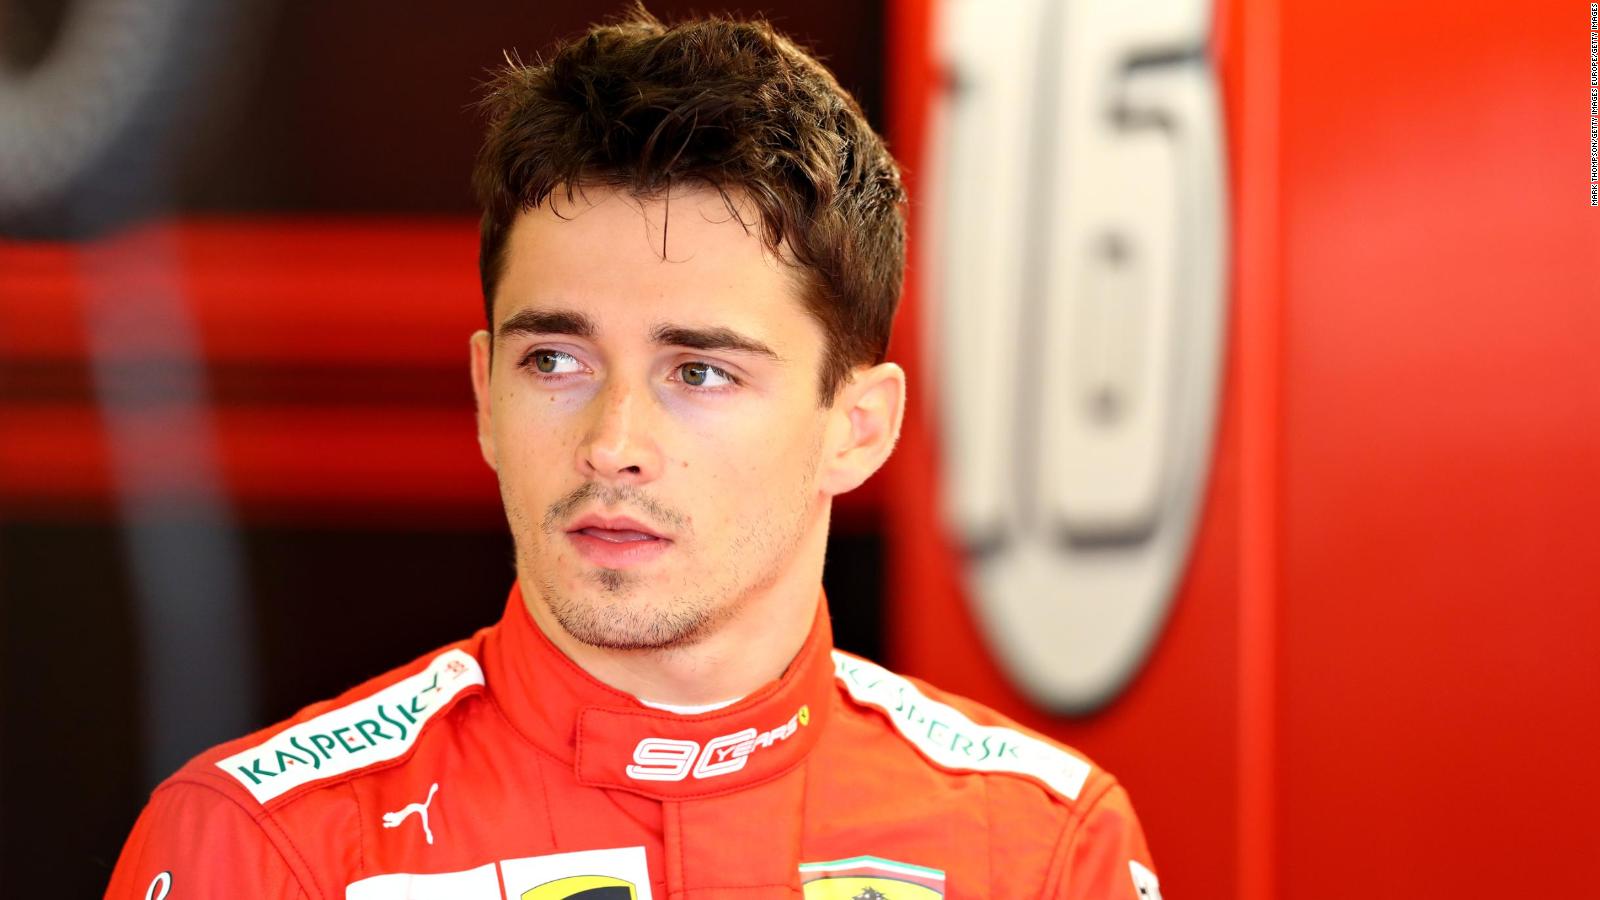 Ferrari youngster Charles Leclerc dreams of 'becoming world champion' - CNN